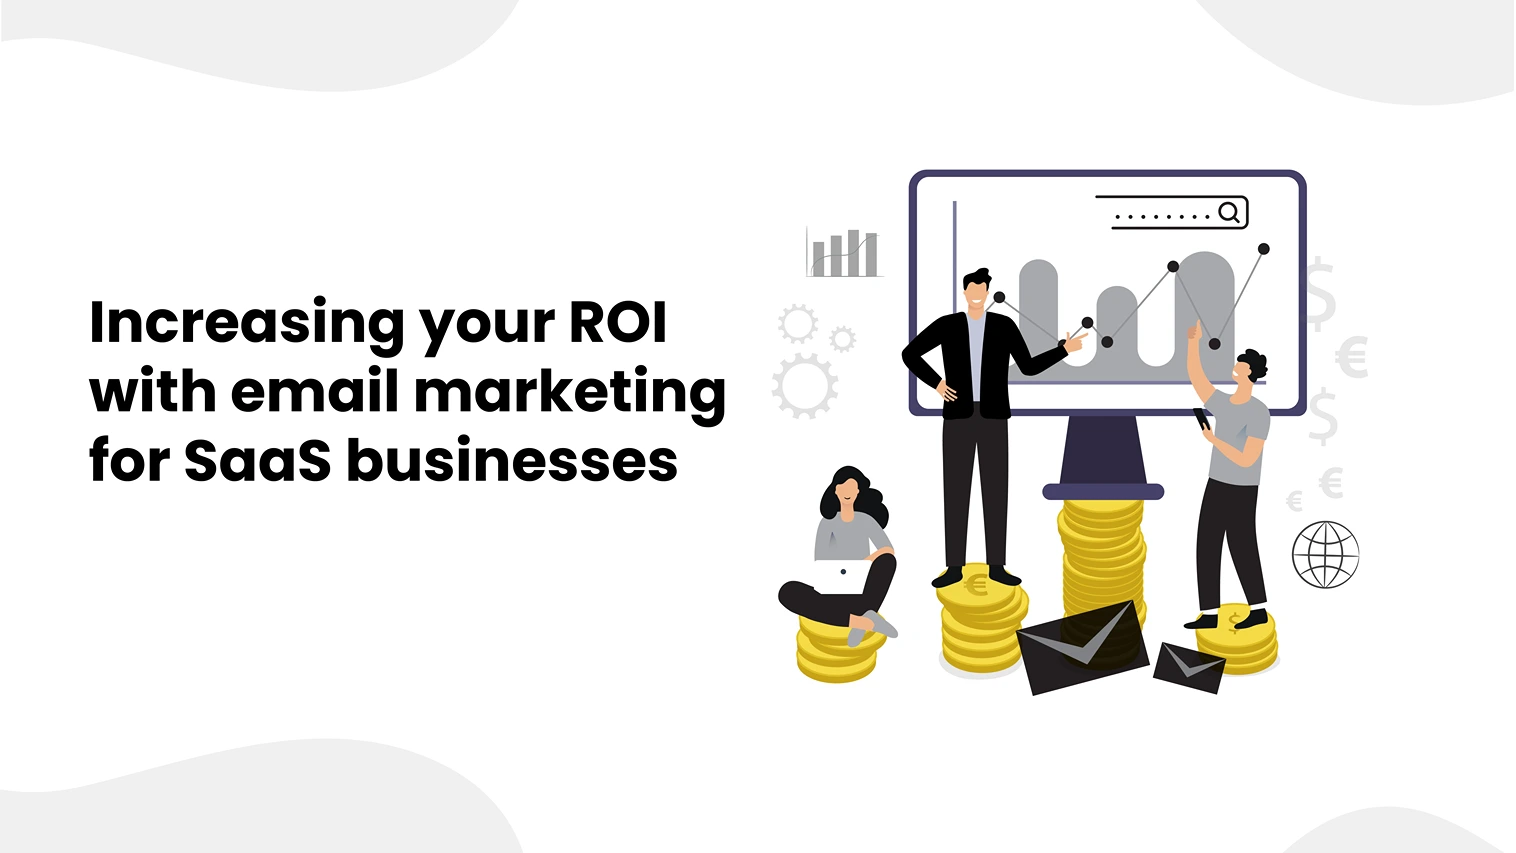 Increasing your ROI with email marketing for SaaS businesses